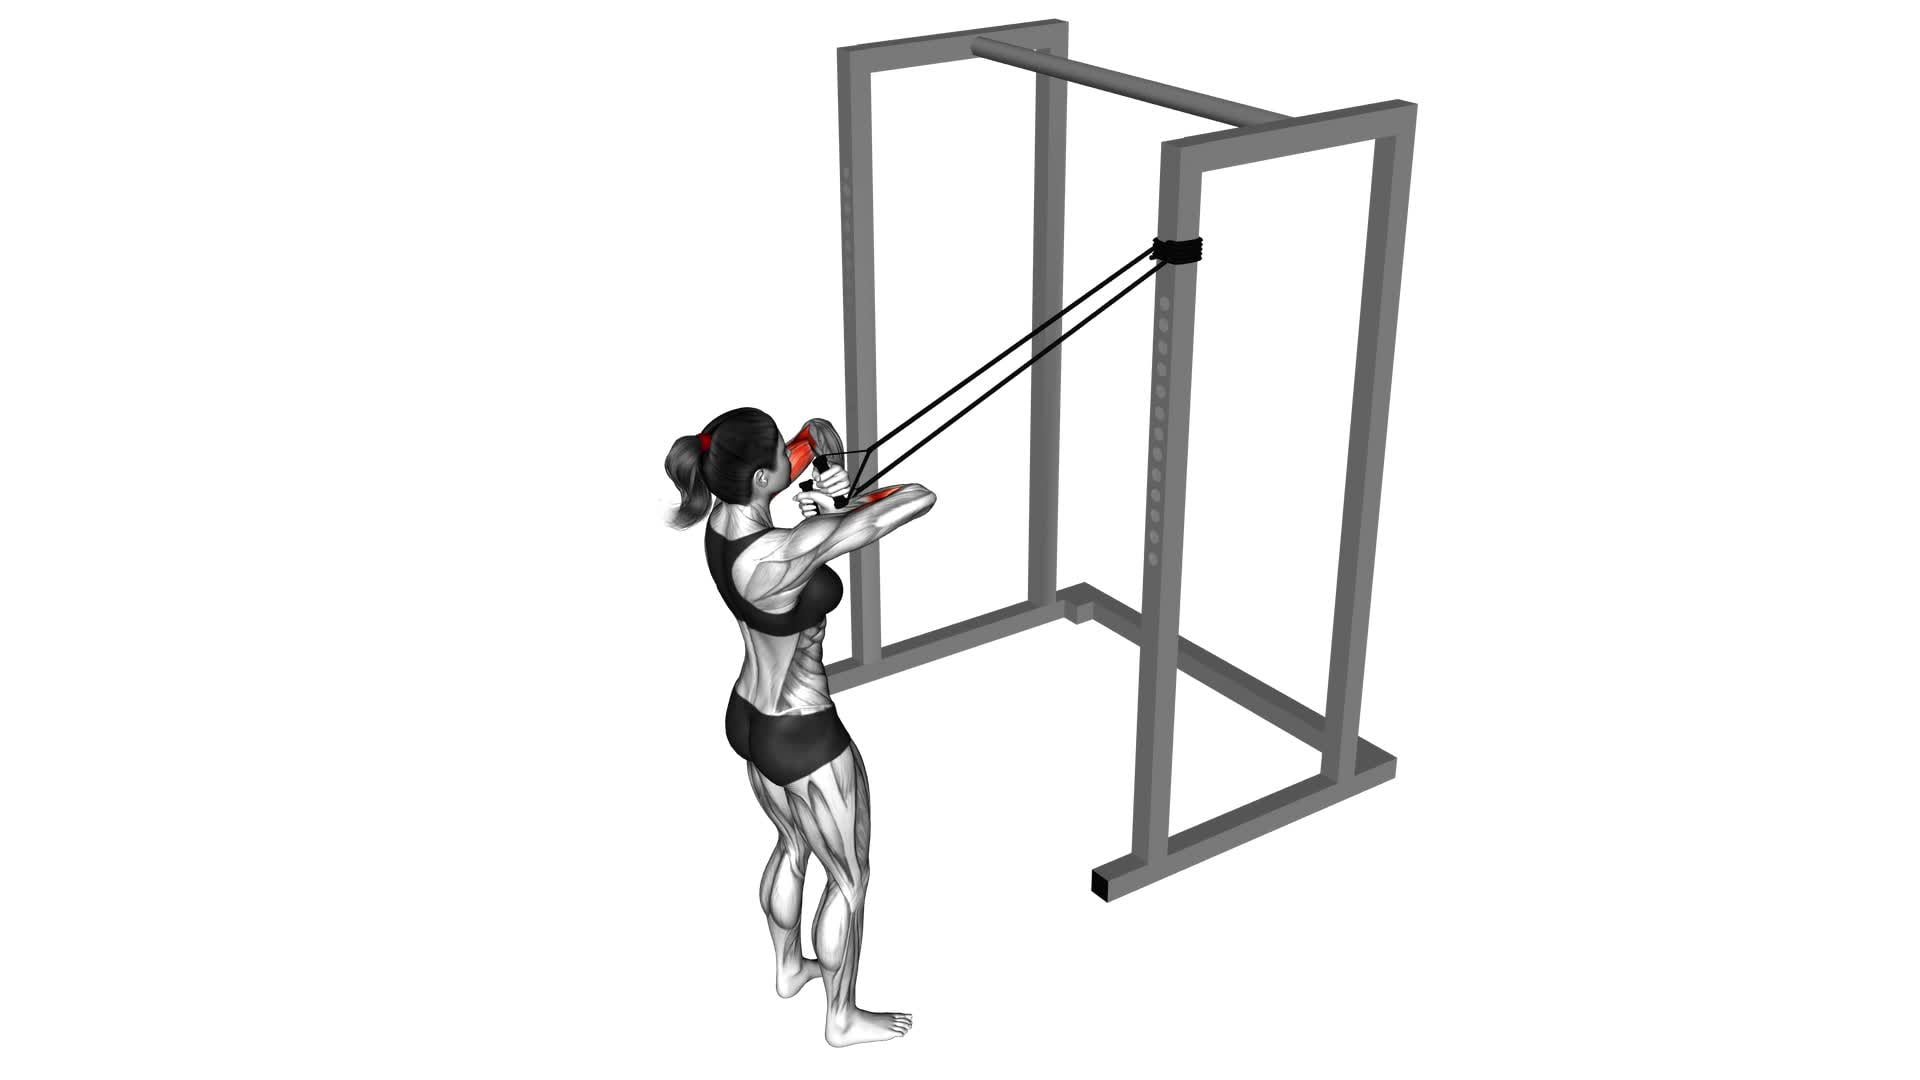 Band Cross Chest Biceps Curl (female) - Video Exercise Guide & Tips